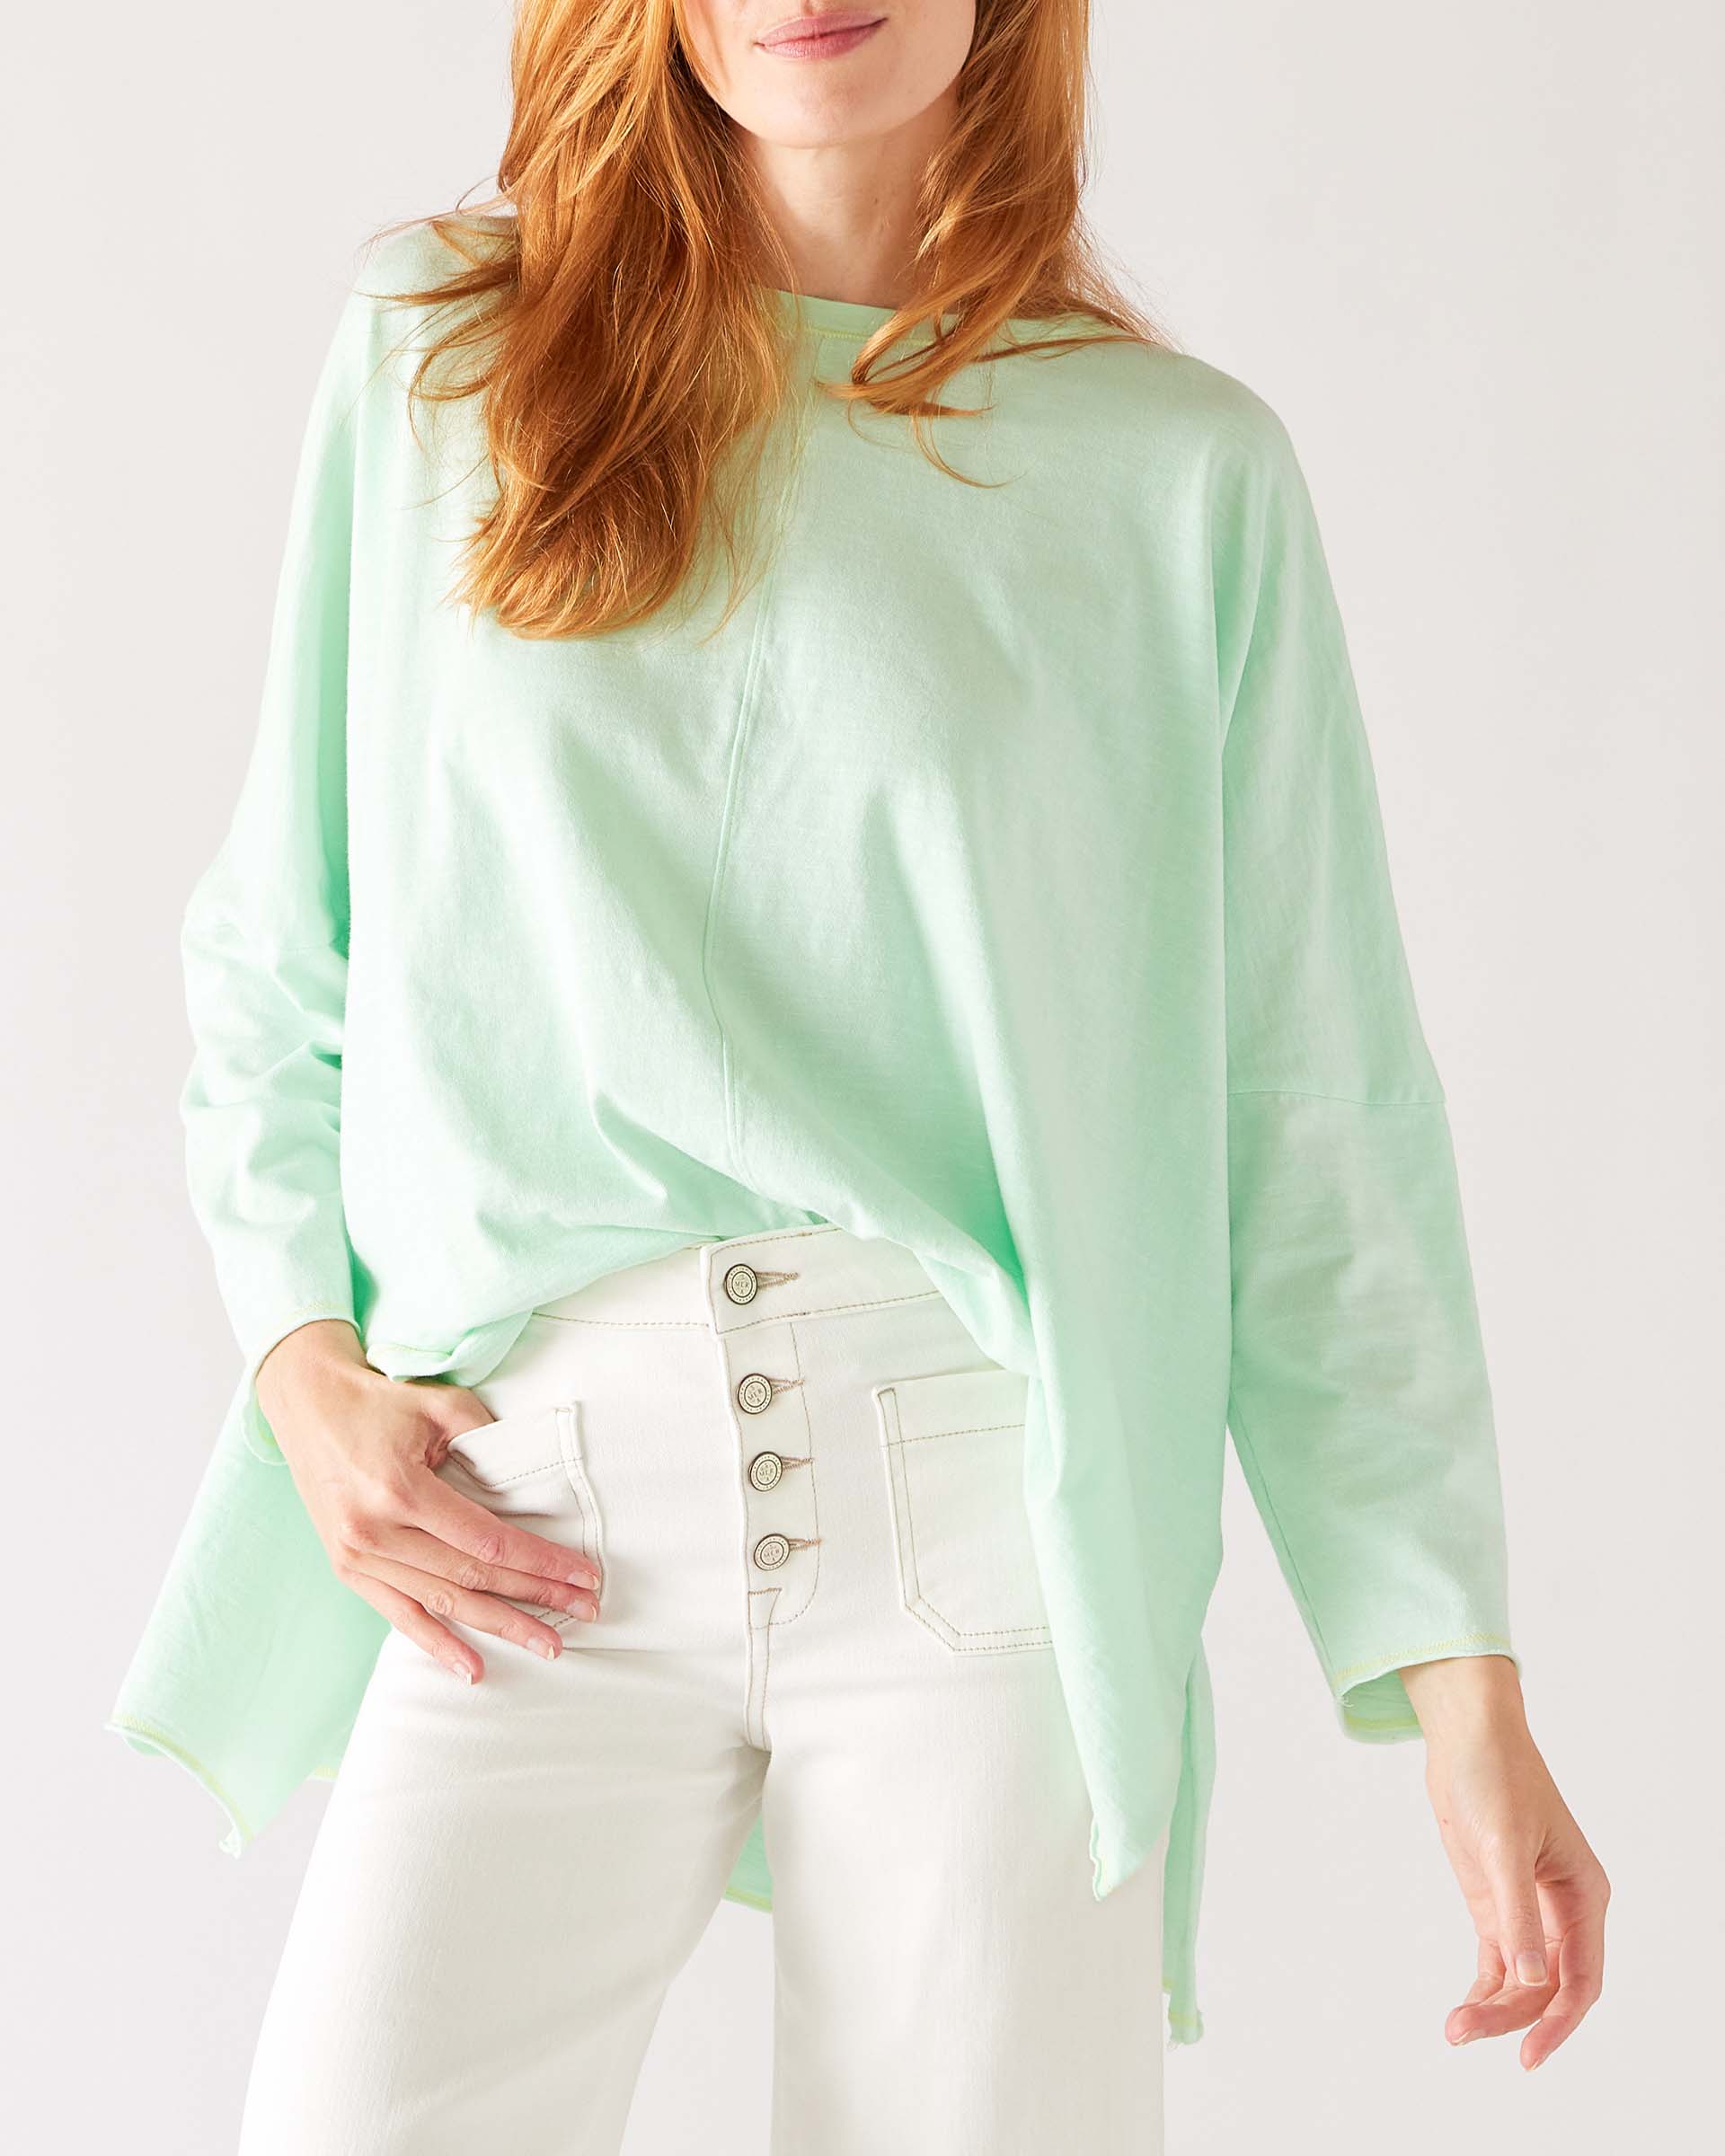 Women's One Size Tee in Light Green Chest View